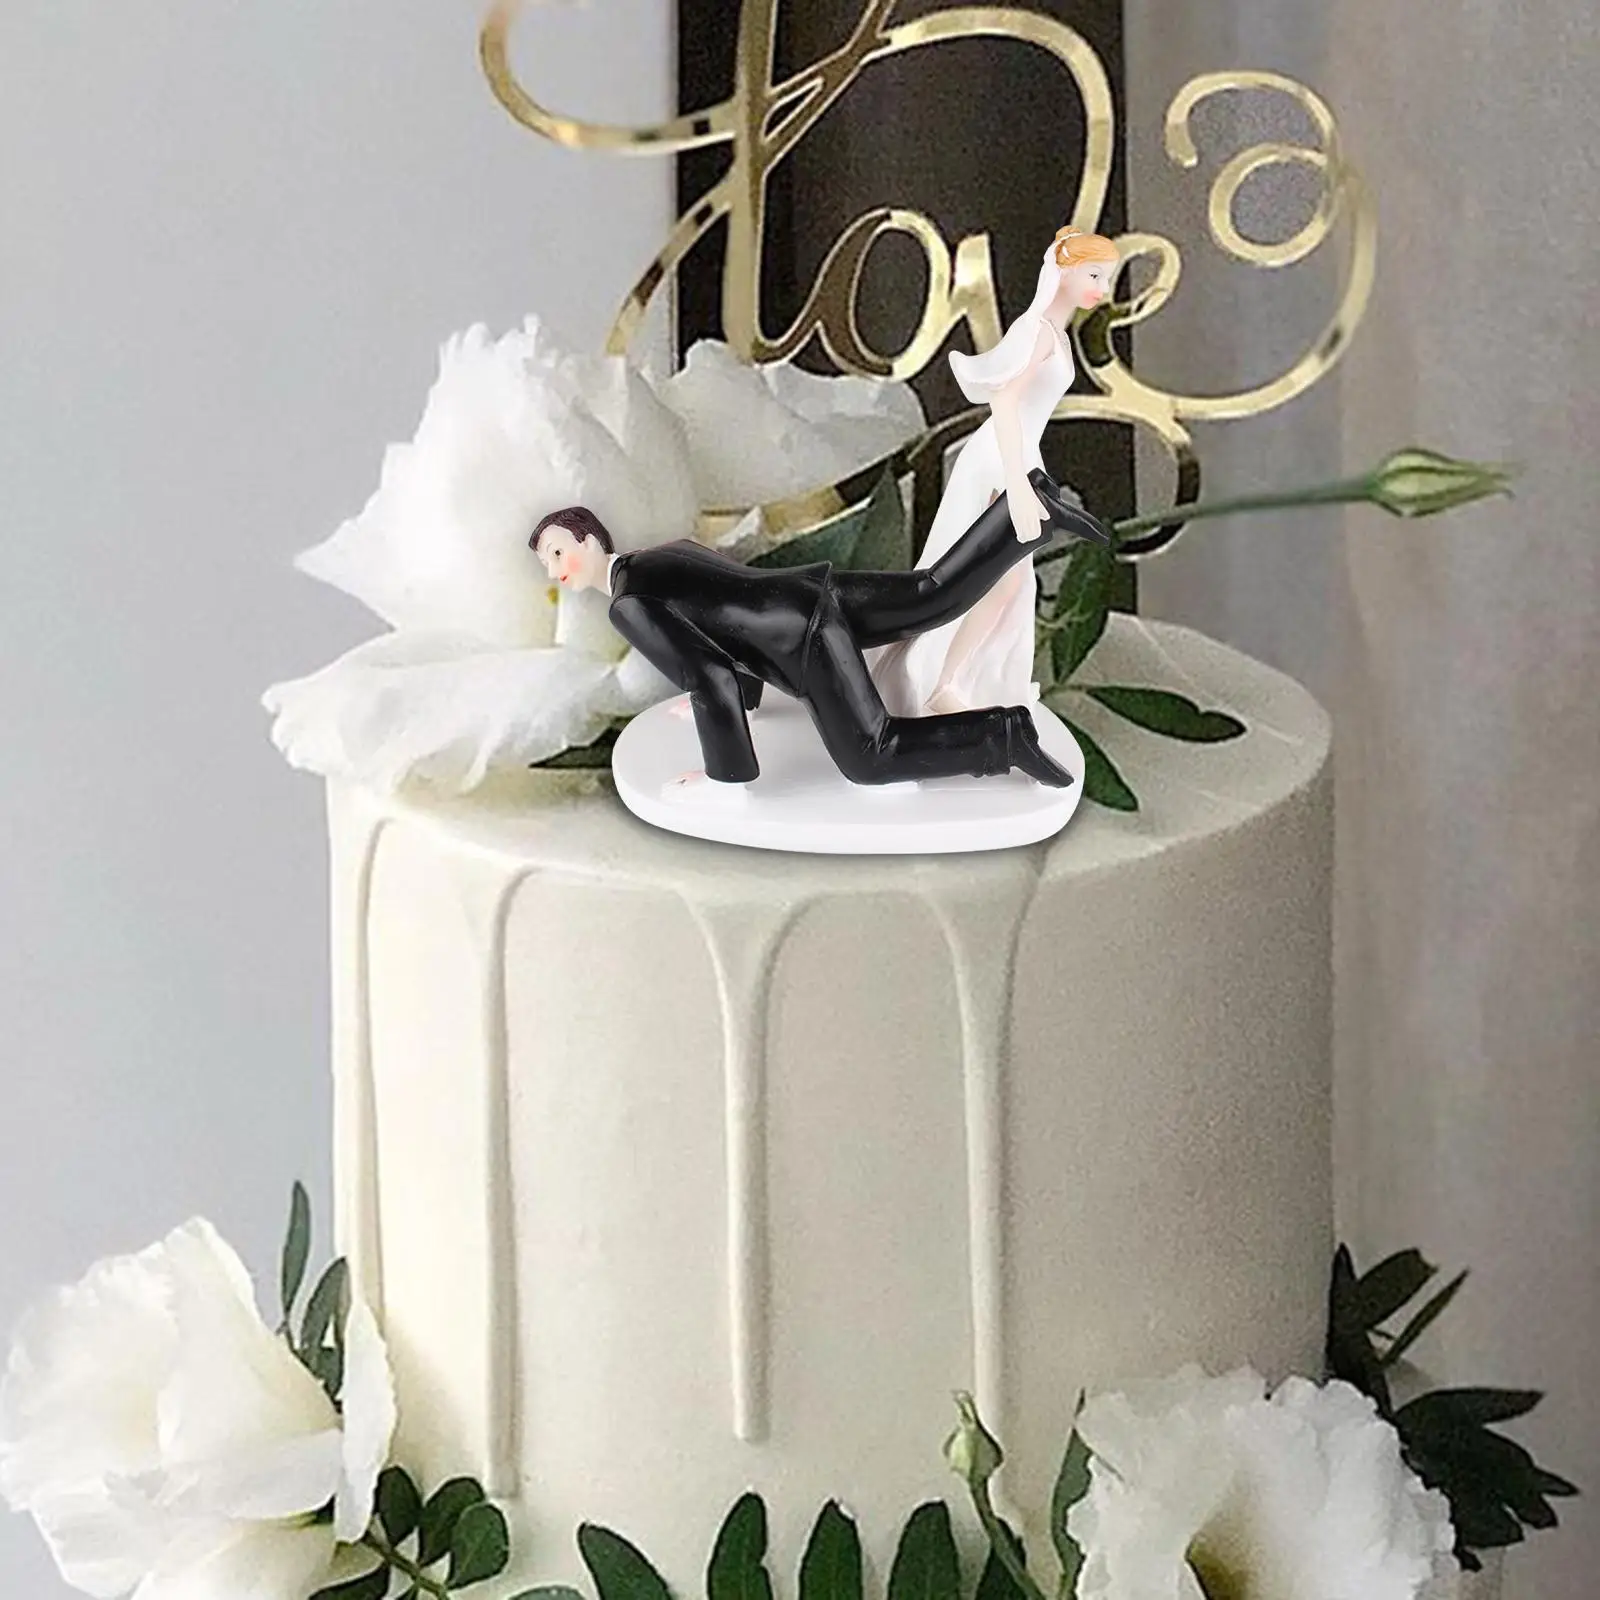 Wedding Cake Topper Ornament Creative Resin Portable Wedding Couple Figurine for Anniversary Tabletop Engagement Decorations